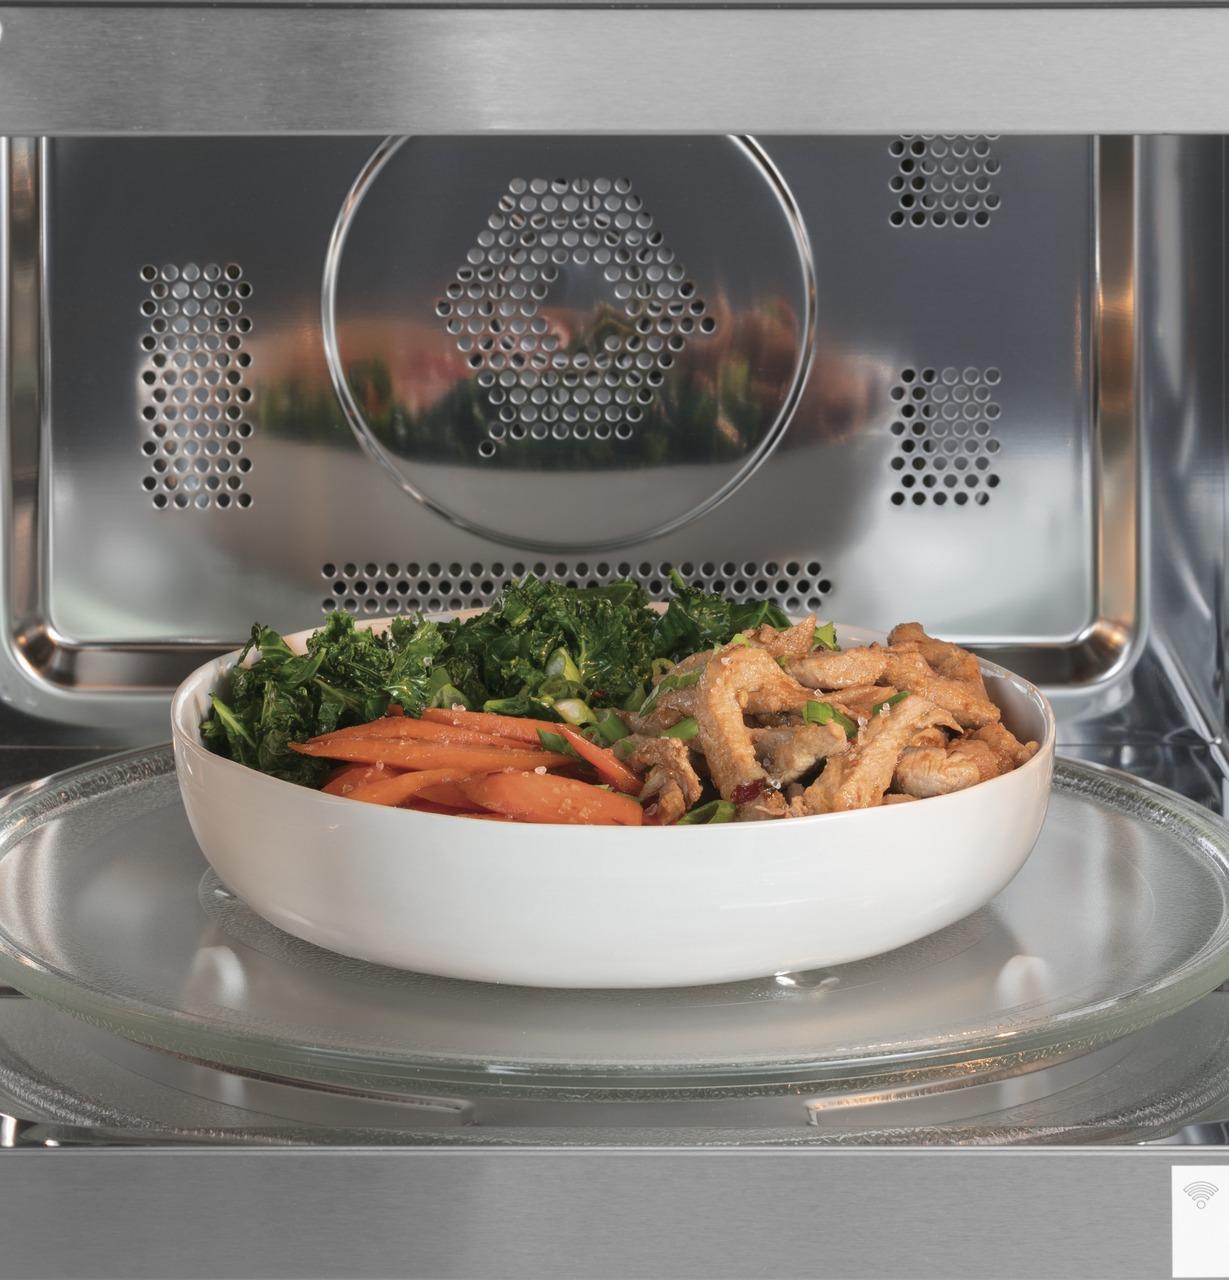 Caf(eback)™ 1.5 Cu. Ft. Smart Countertop Convection/Microwave Oven in Platinum Glass